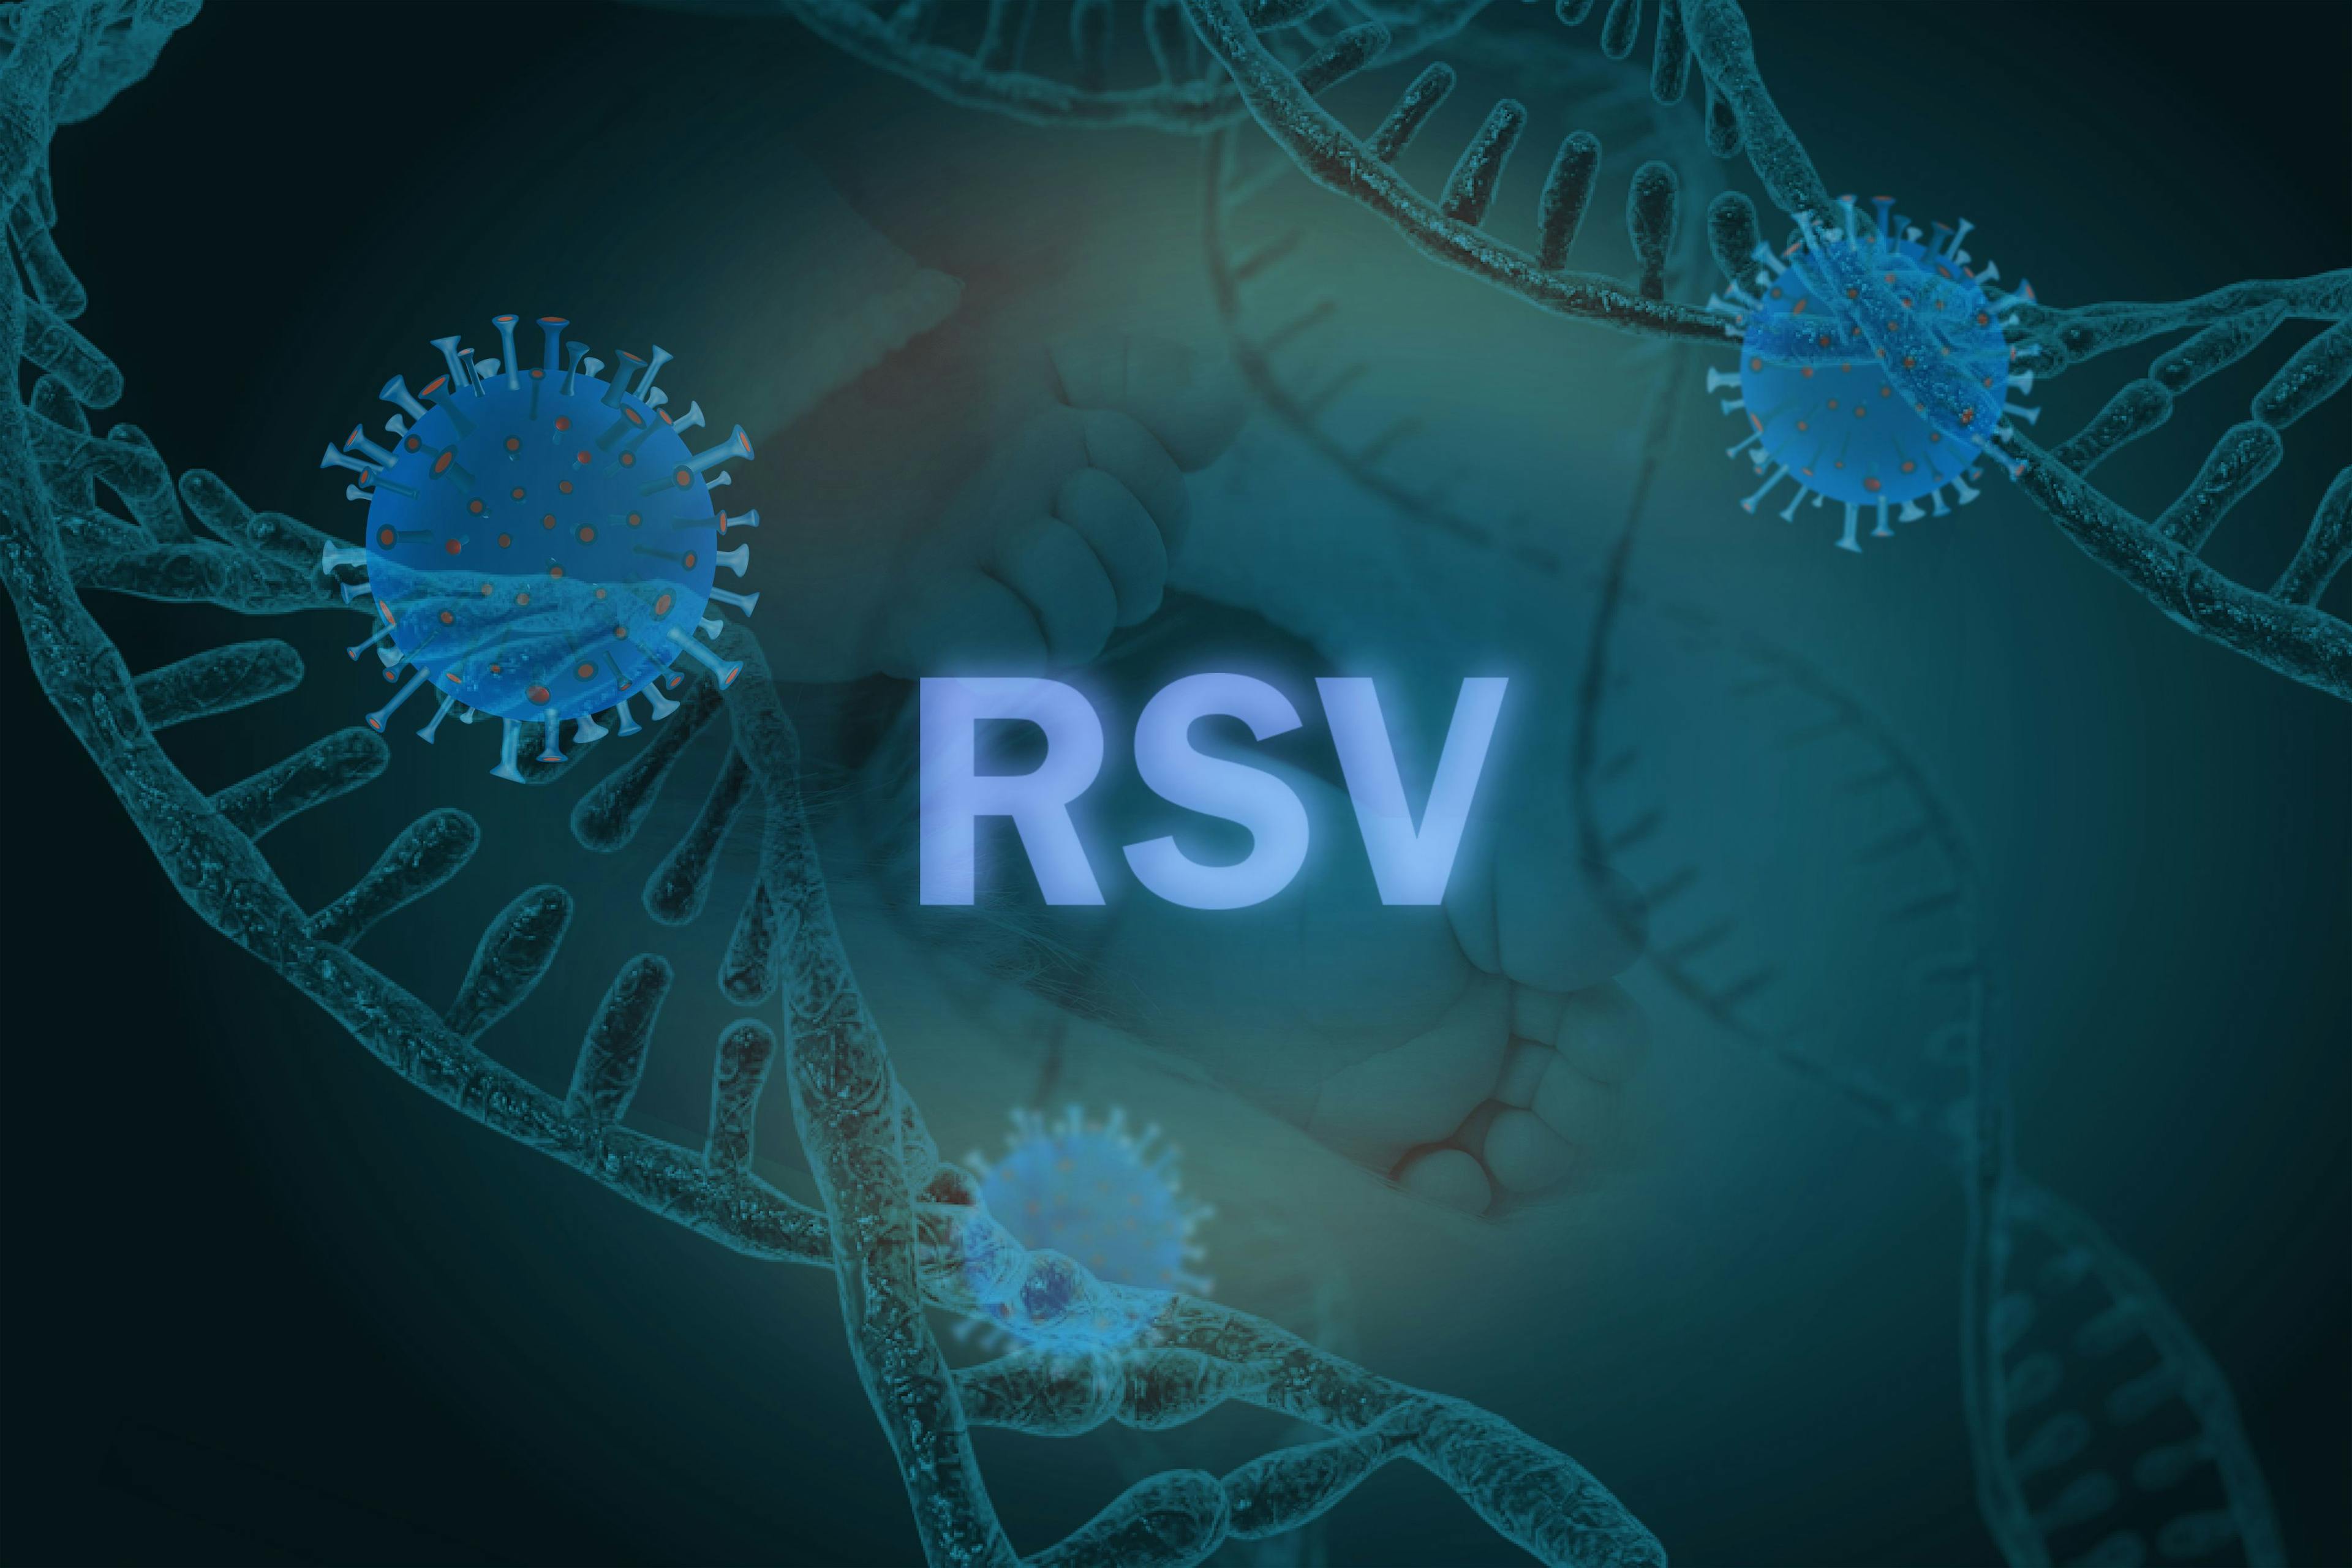 RSV virus and DNA on the background of infant feet - Image credit: Julia | stock.adobe.com